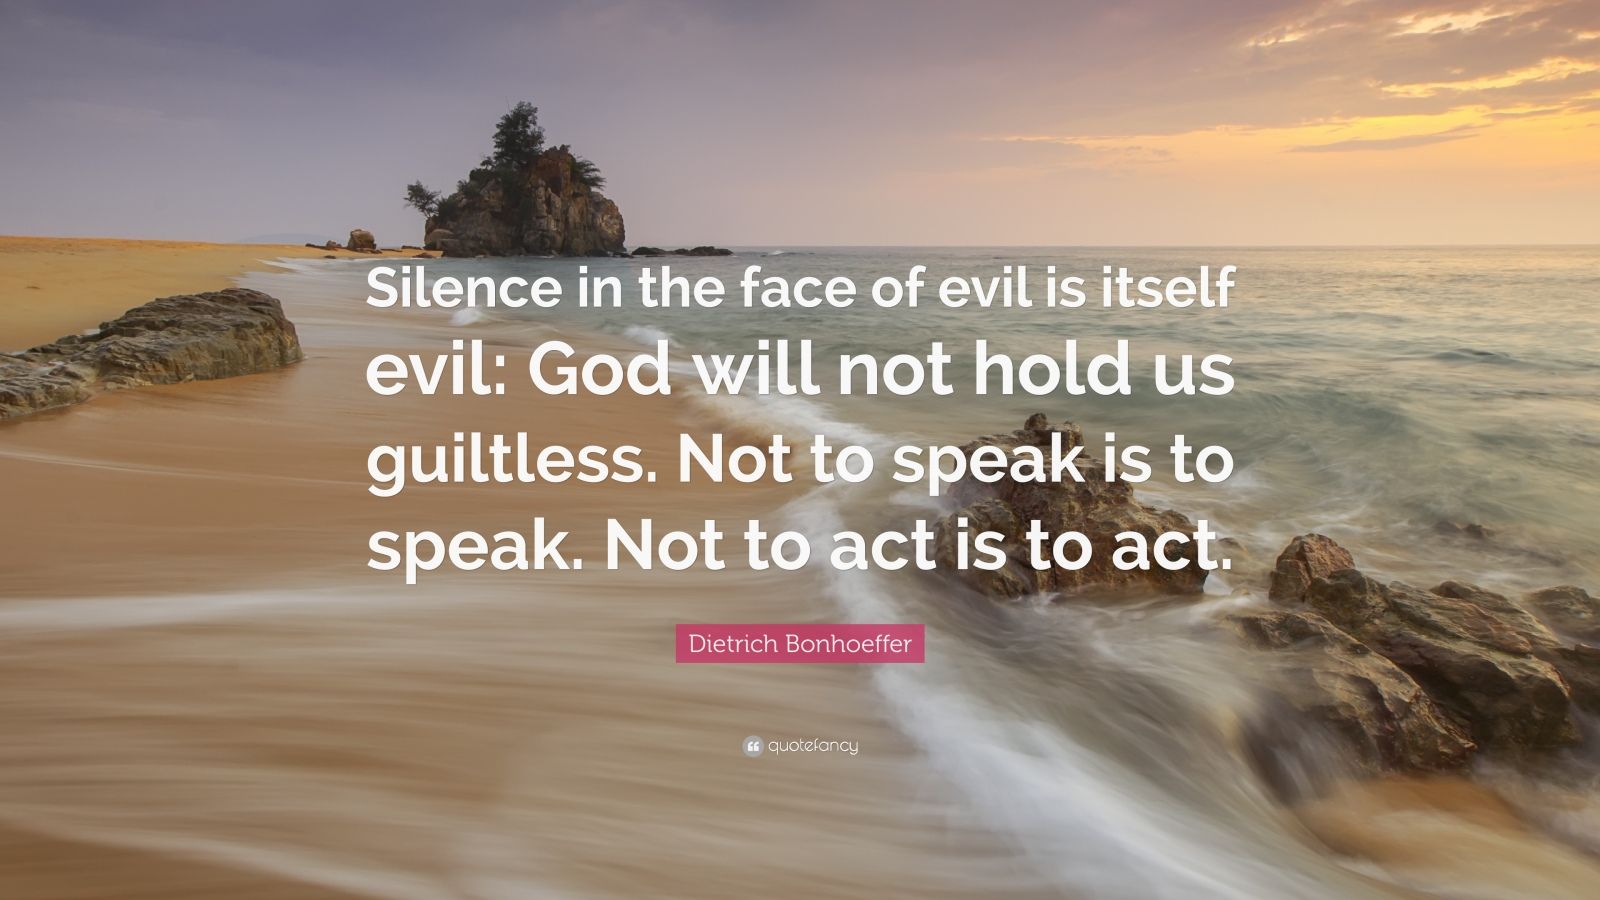 Dietrich Bonhoeffer Quote: “Silence in the face of evil is itself evil